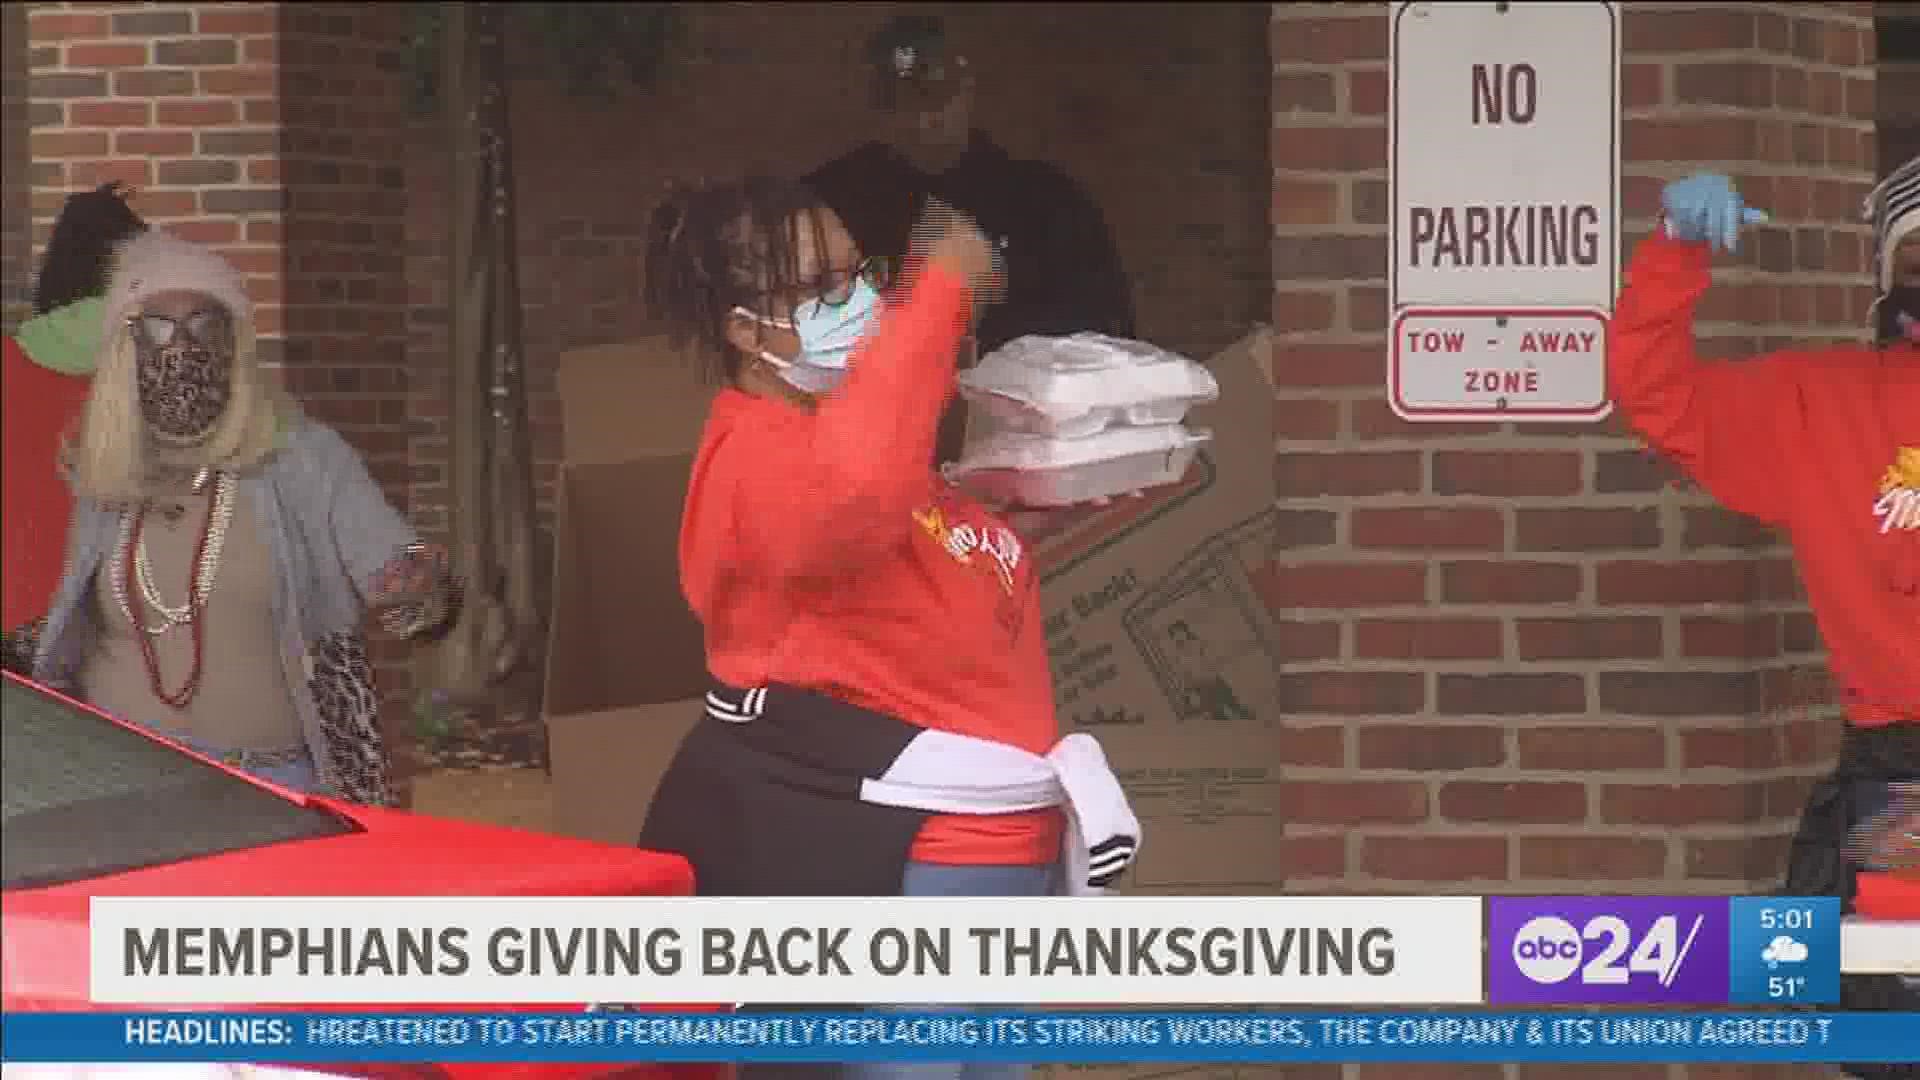 ABC24 News crisscrossed the city, showcasing how non-profits and churches large and small did their part to feed and serve the less fortunate.